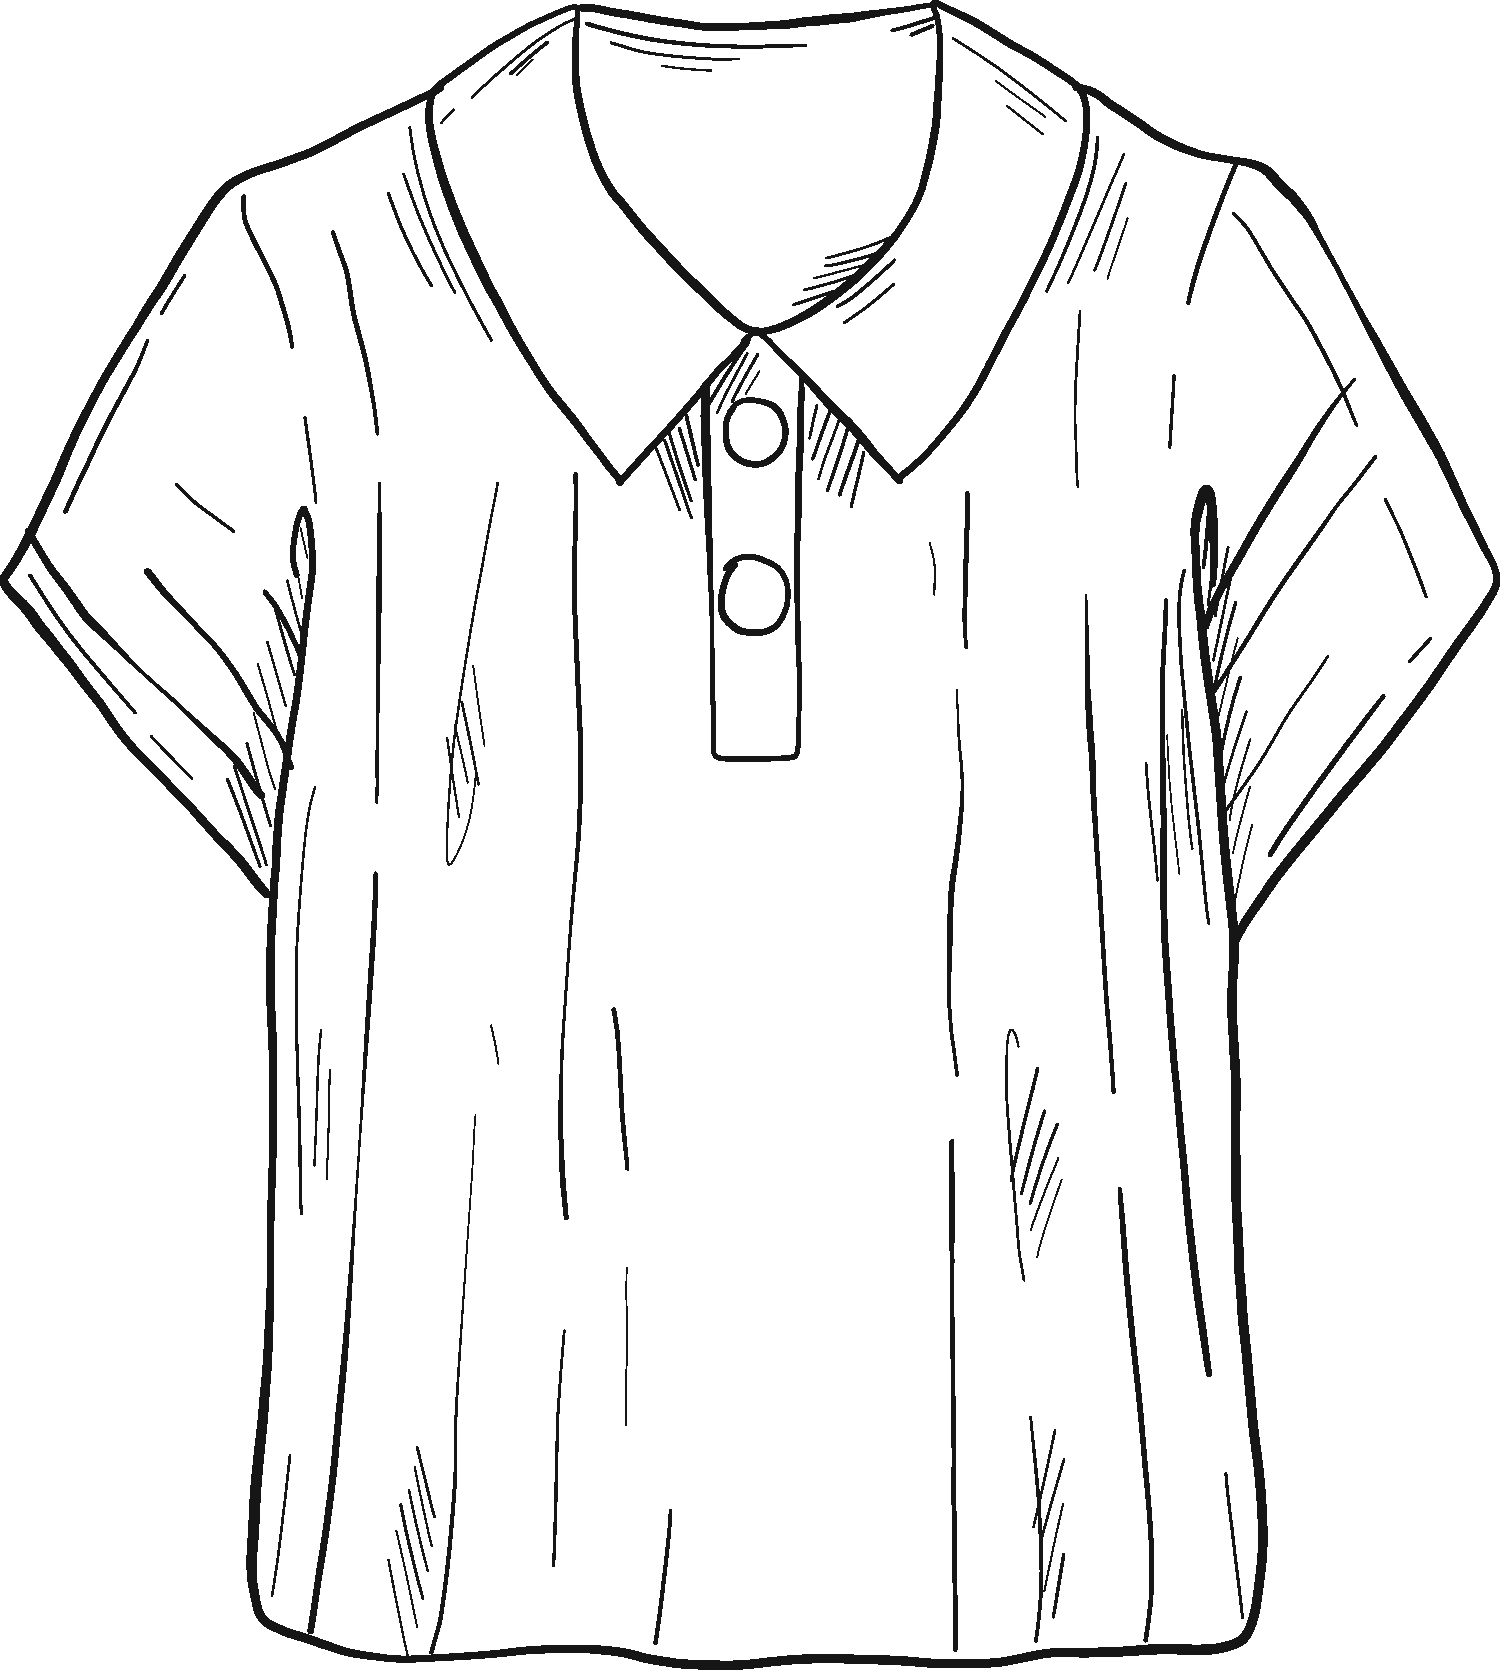 Short-sleeved Shirt coloring page - ColouringPages